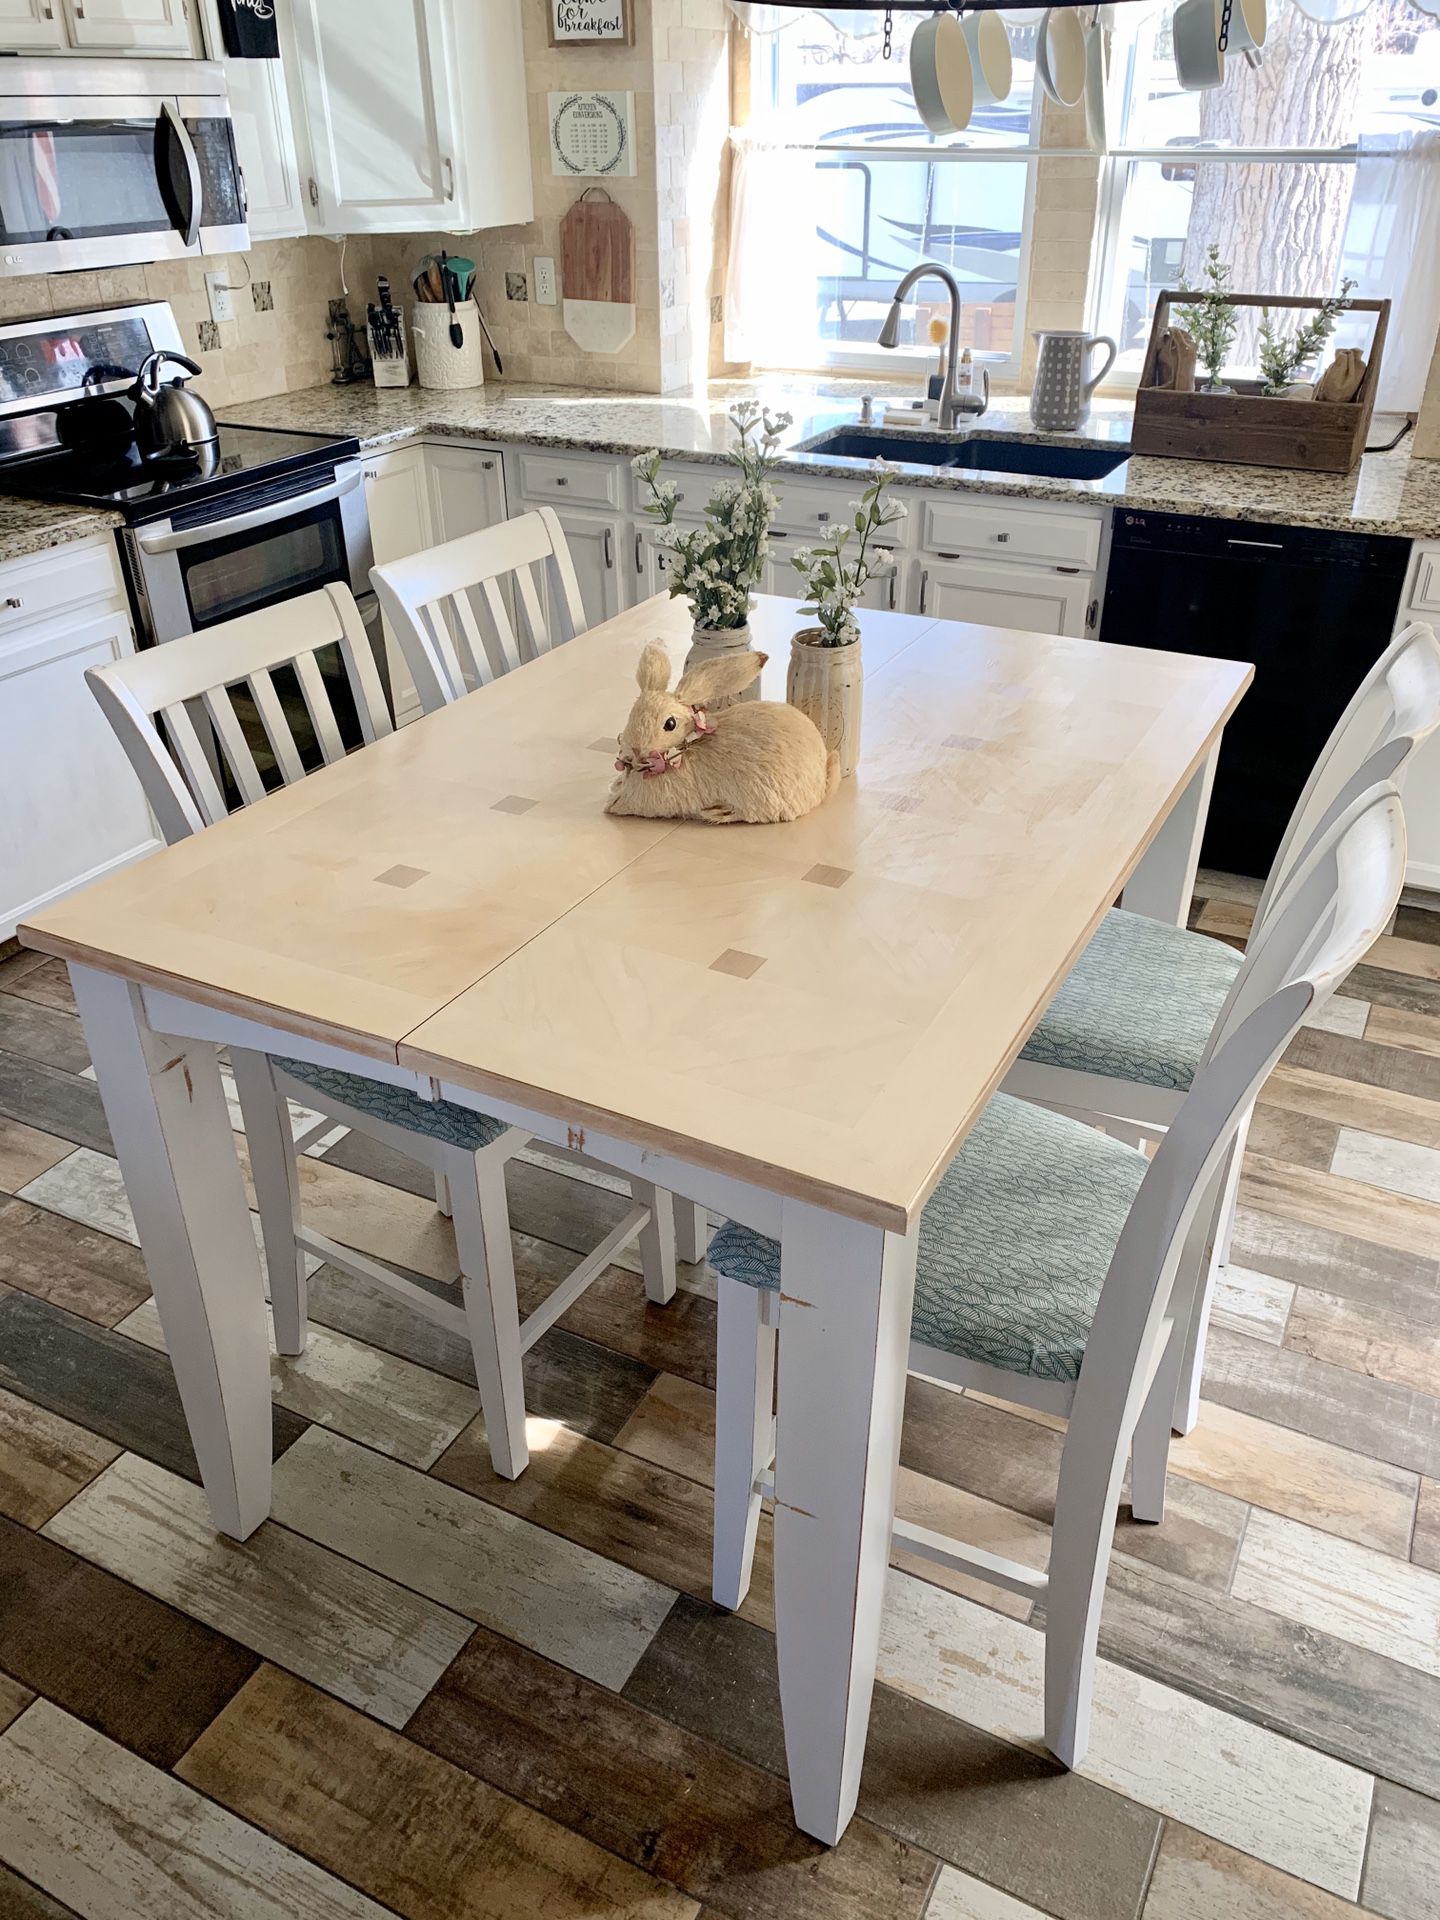 Tall counter height kitchen table set